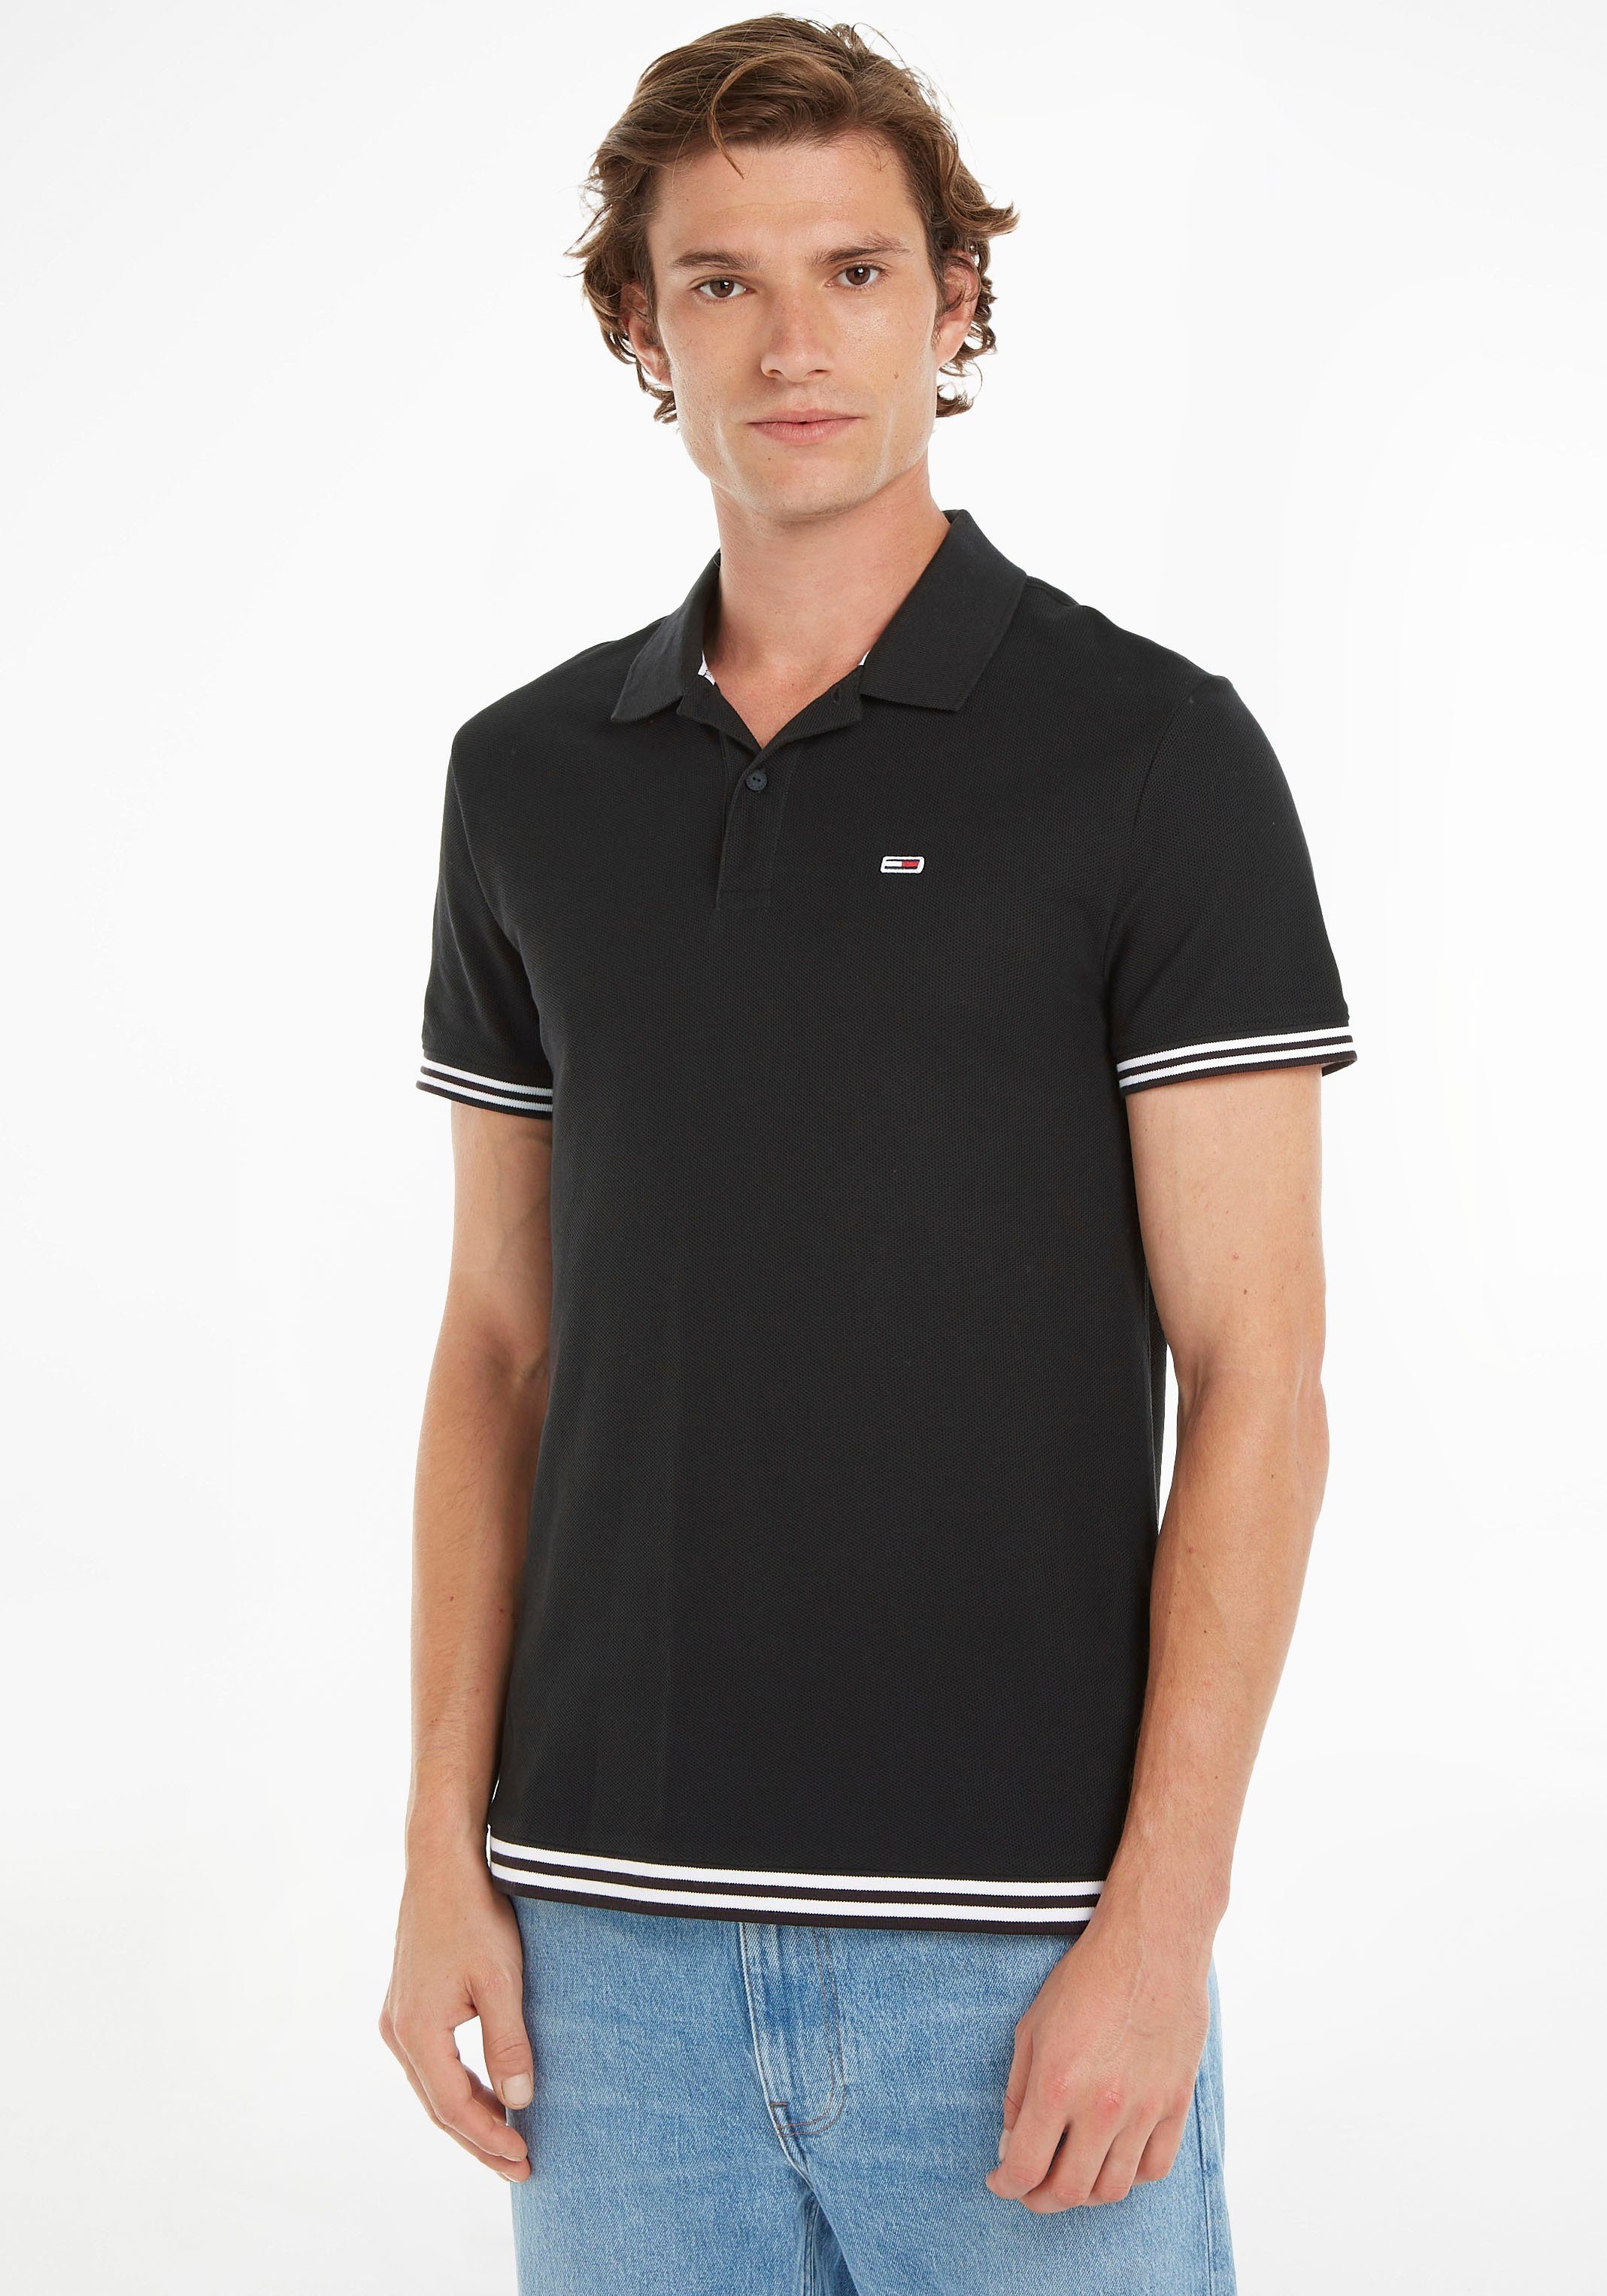 Tommy Jeans POLO Polokragen CLSC TIPPING Poloshirt TJM Black mit